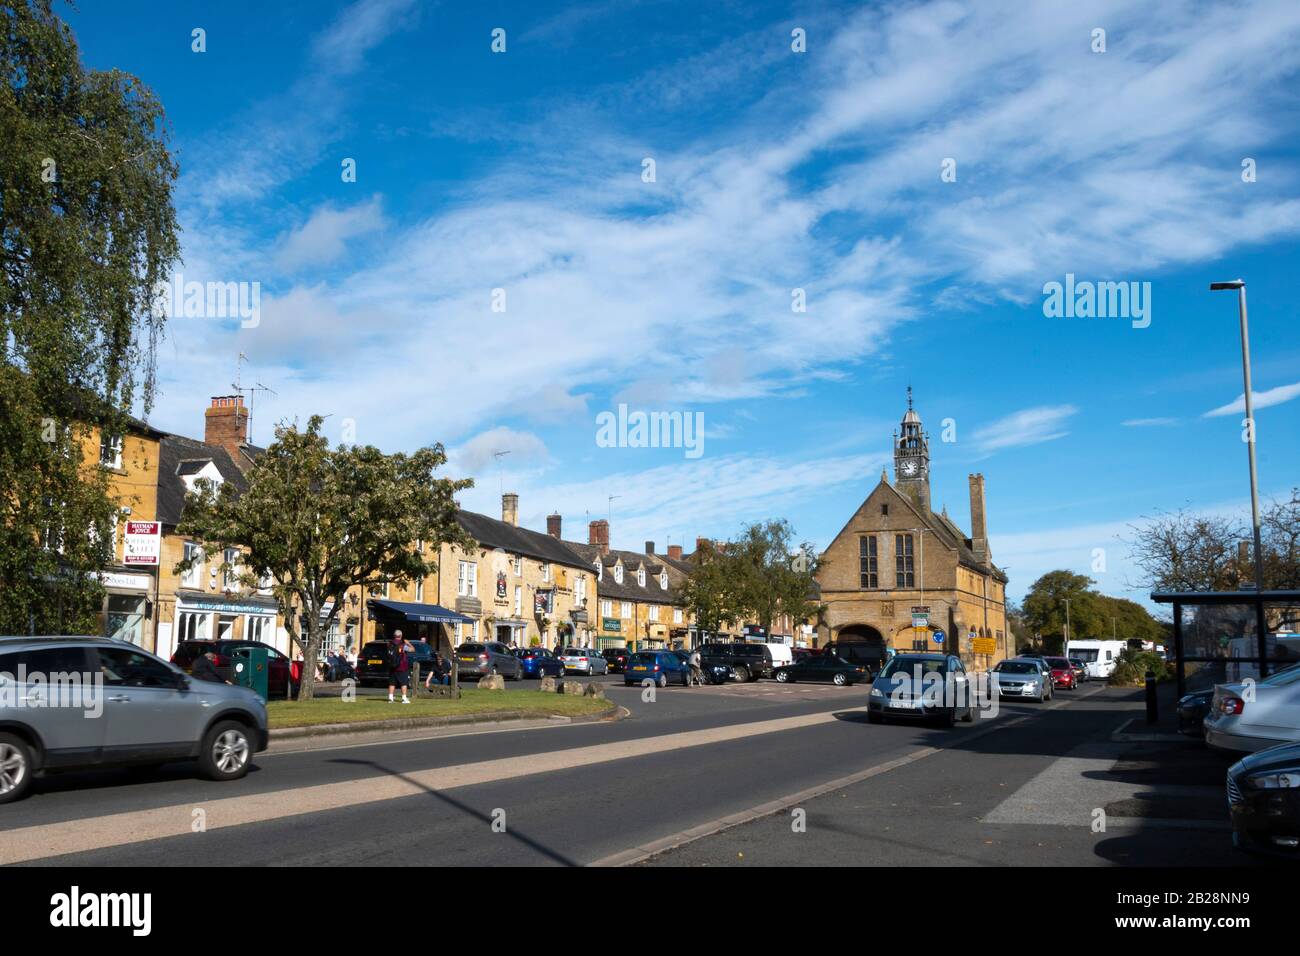 Redesdale Market Hall, Moreton in the Marsh, Cotswolds, Gloucestershire, England Stock Photo